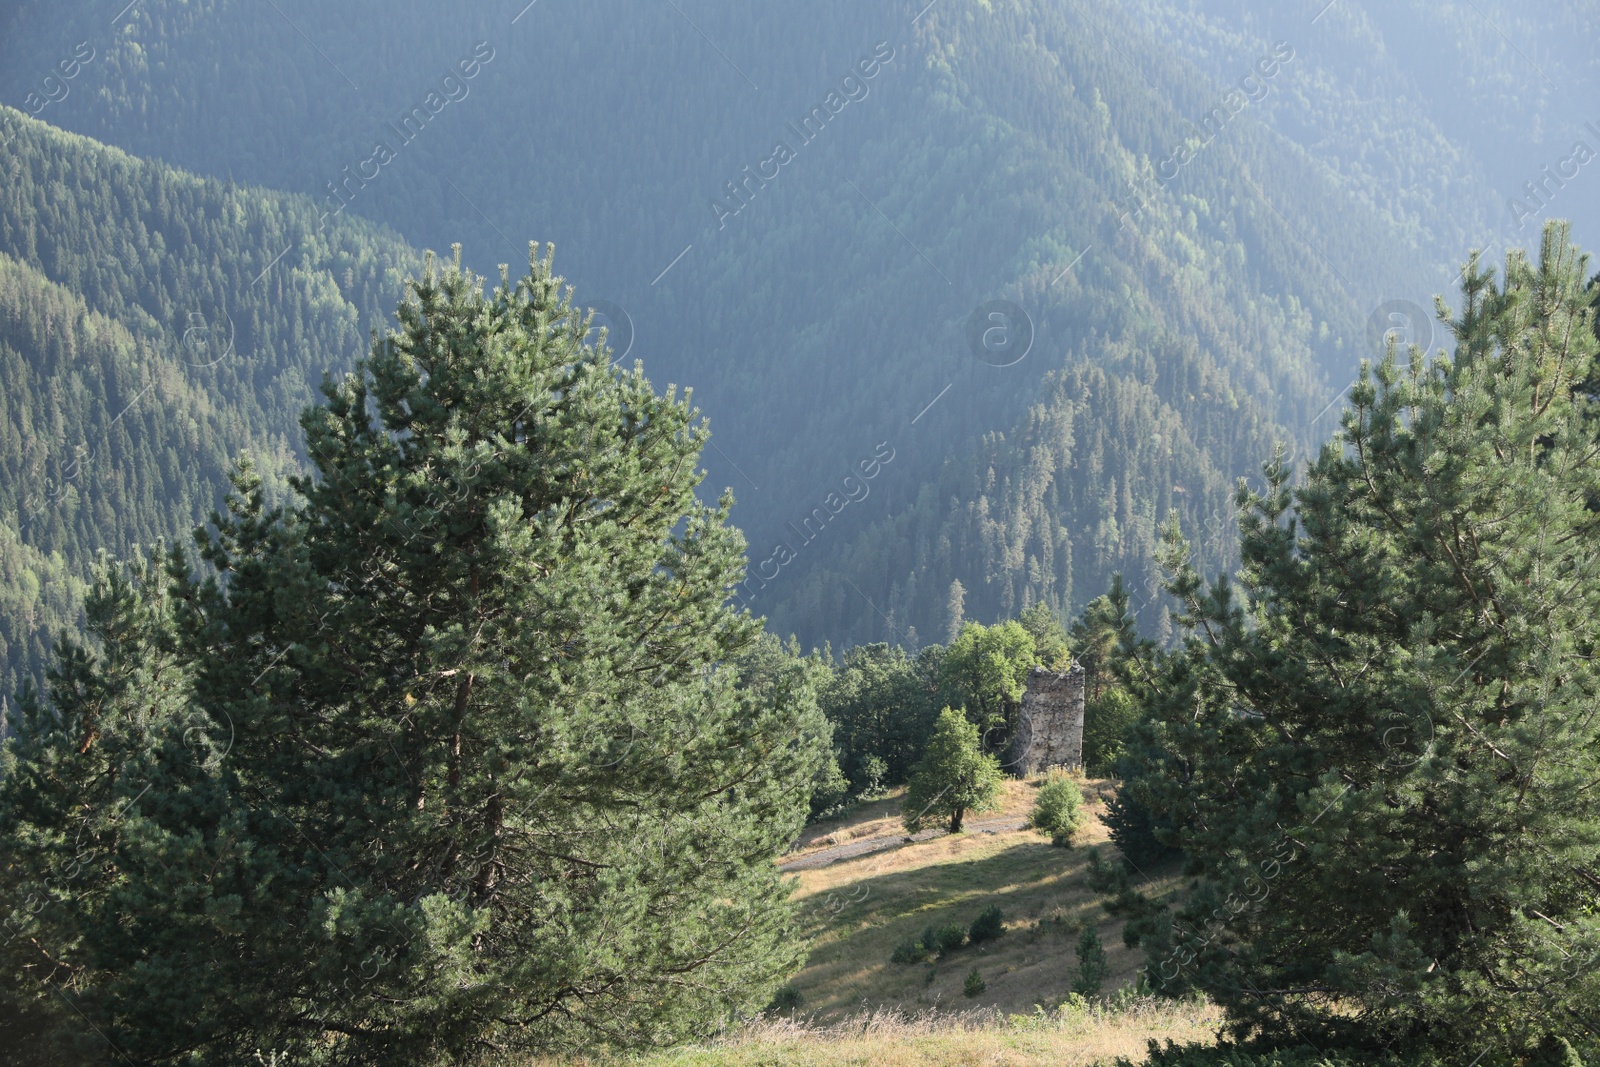 Photo of Picturesque view mountain landscape with meadow and forest on sunny day